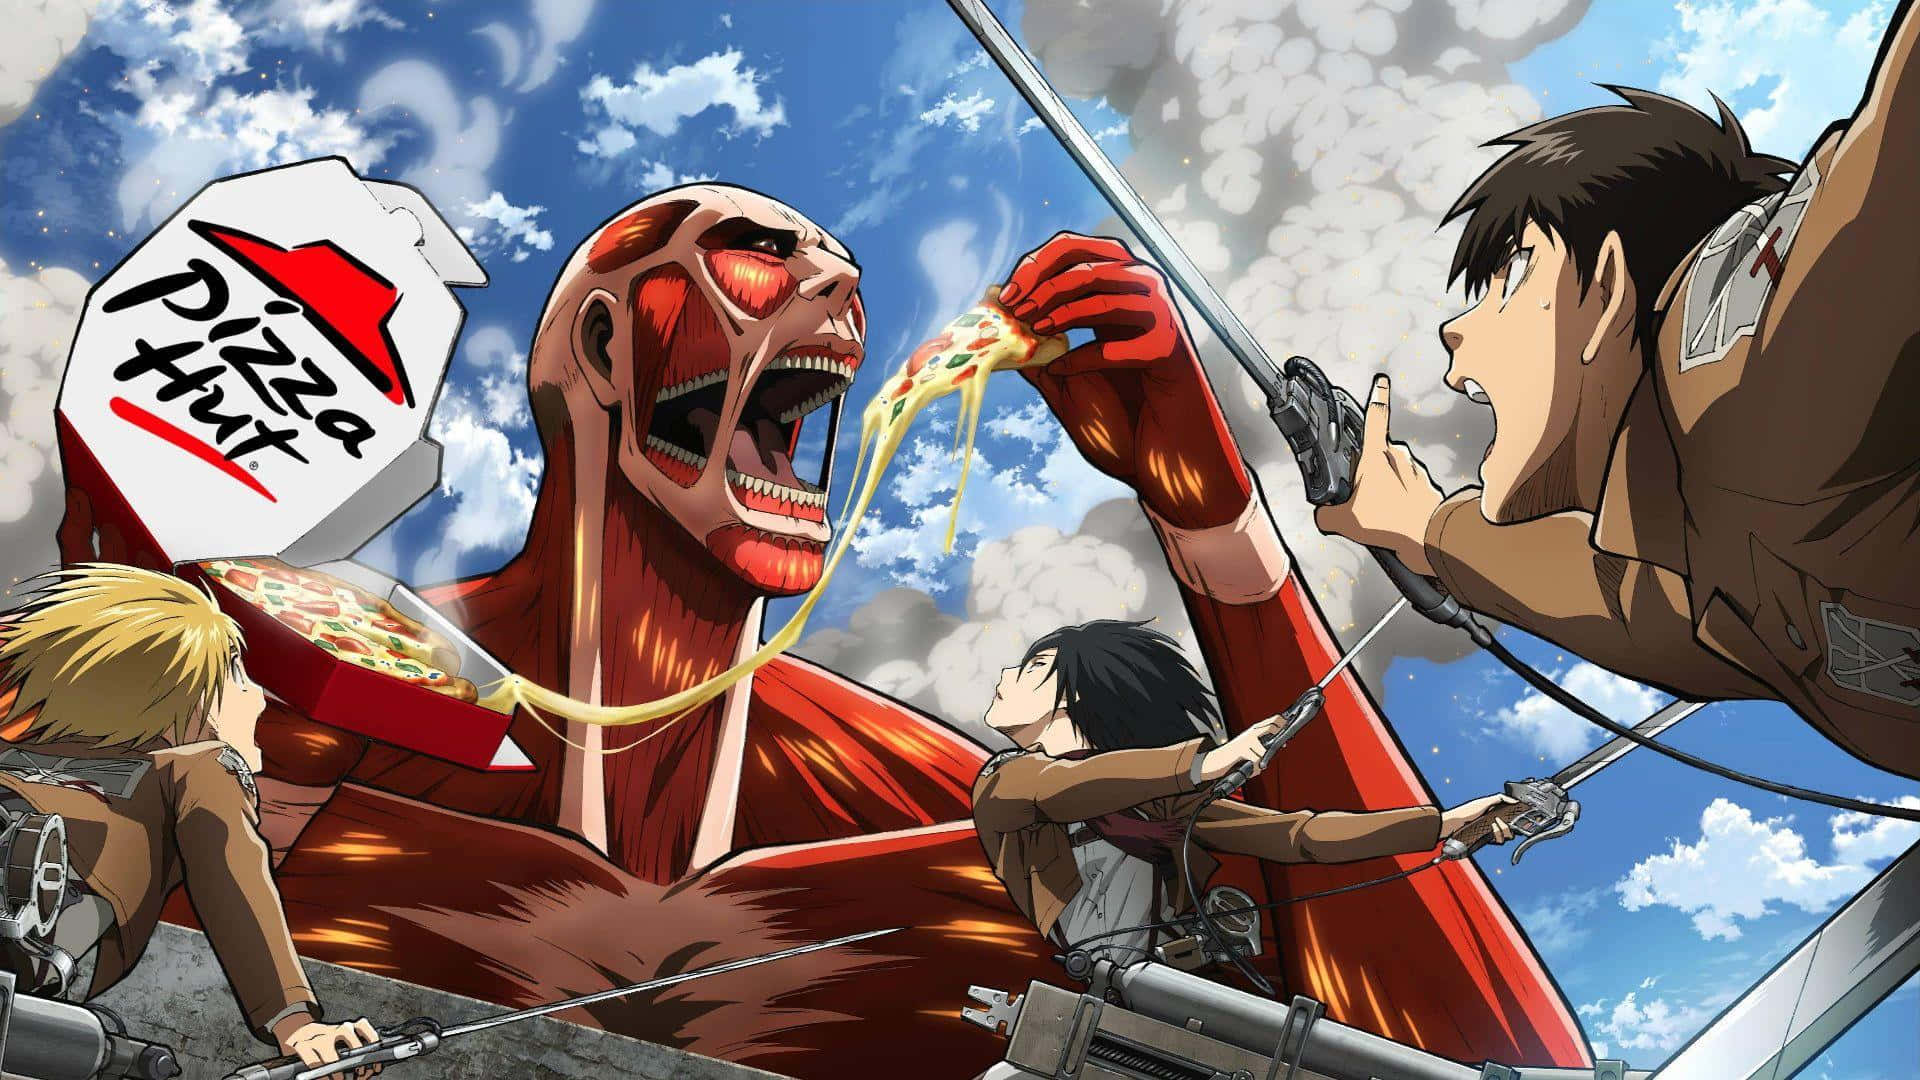 The calm before the storm- A glimpse of the postwar world of Attack on Titan